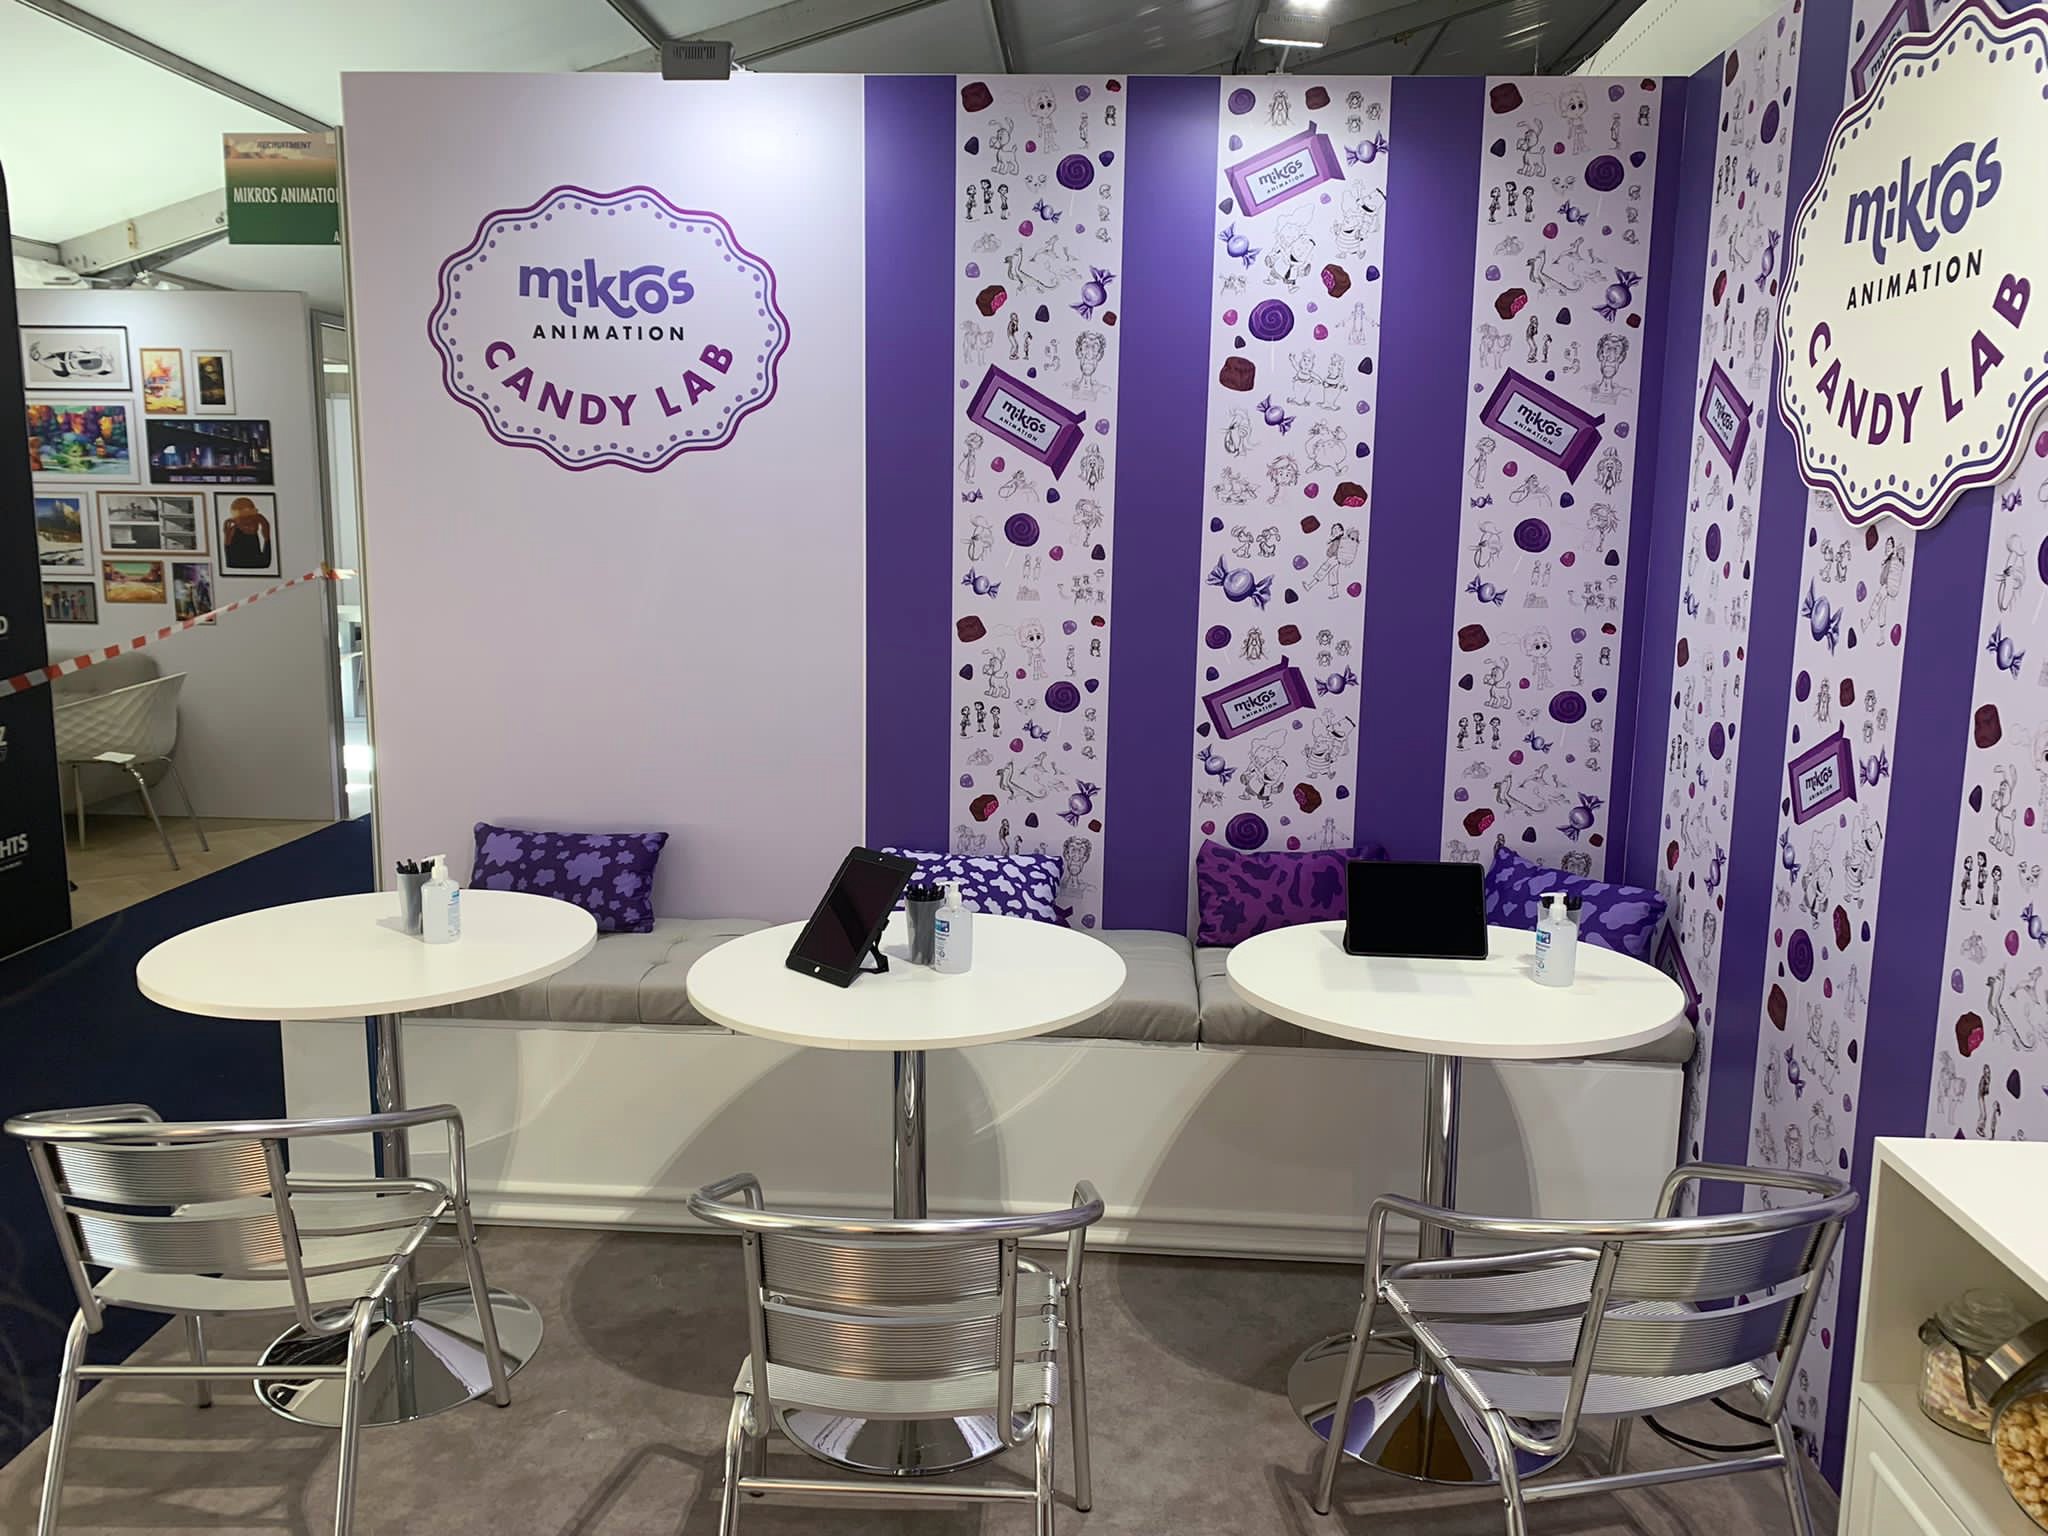 MIKROS_CandyLab-Booth-7.jpg